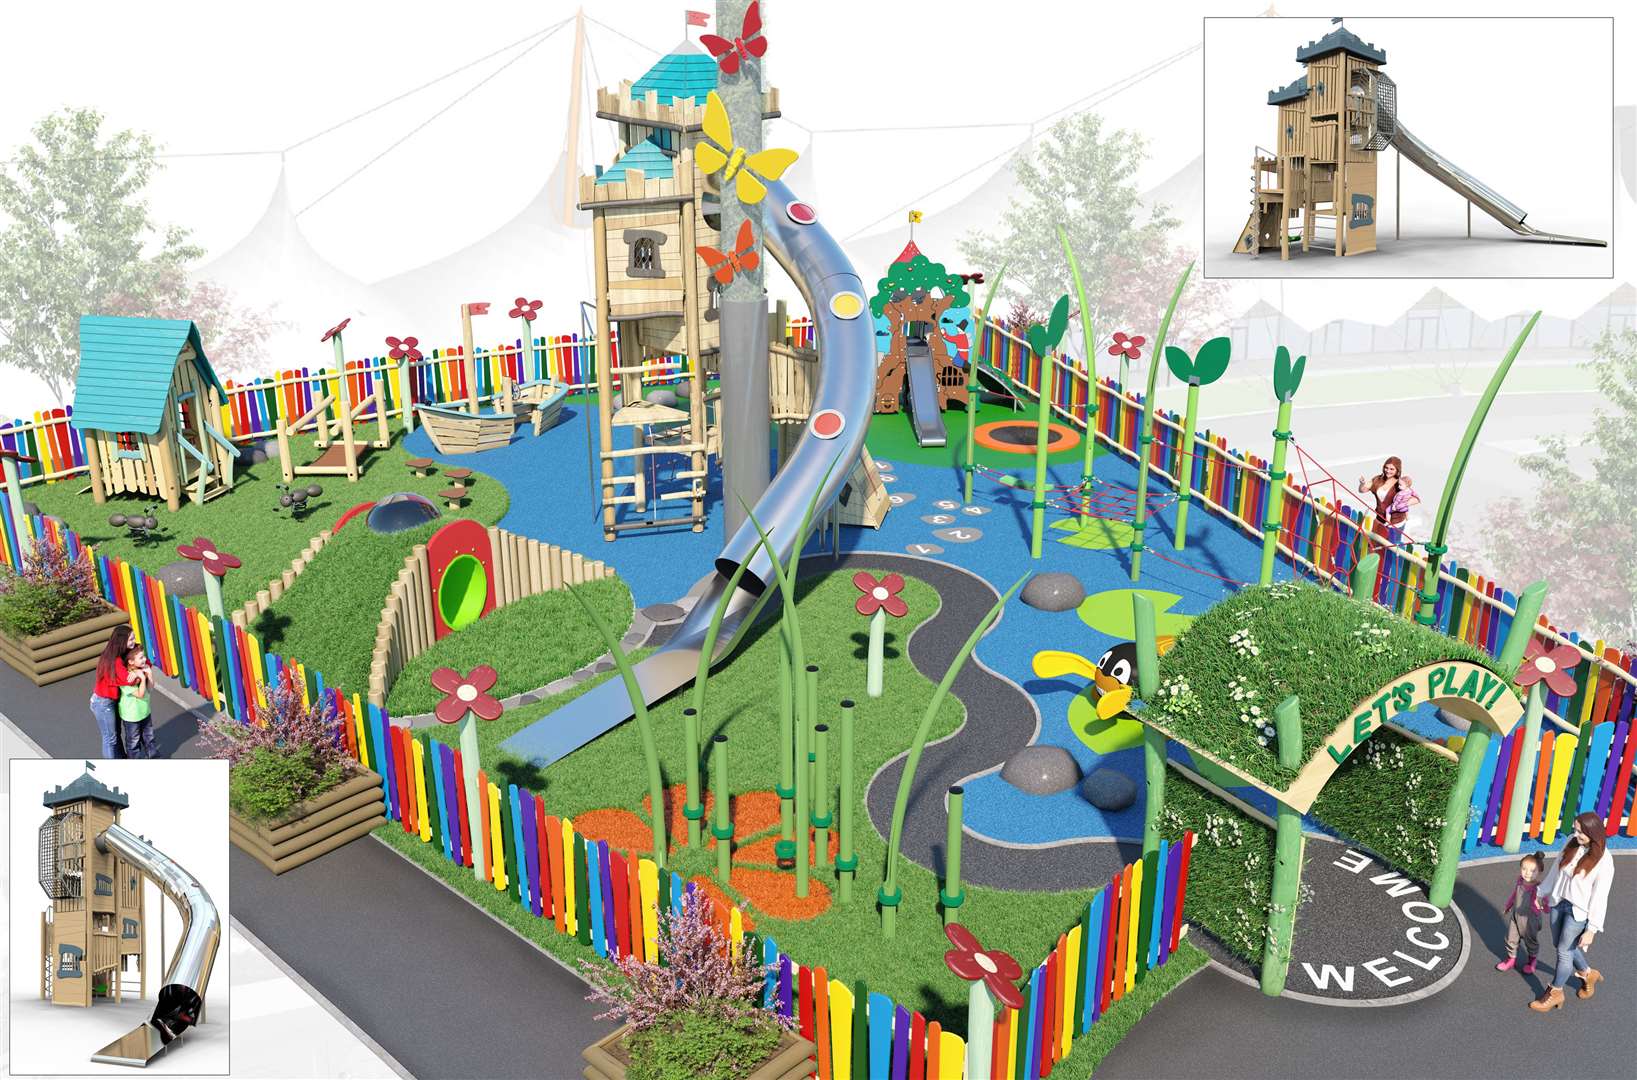 The new play area will open next month